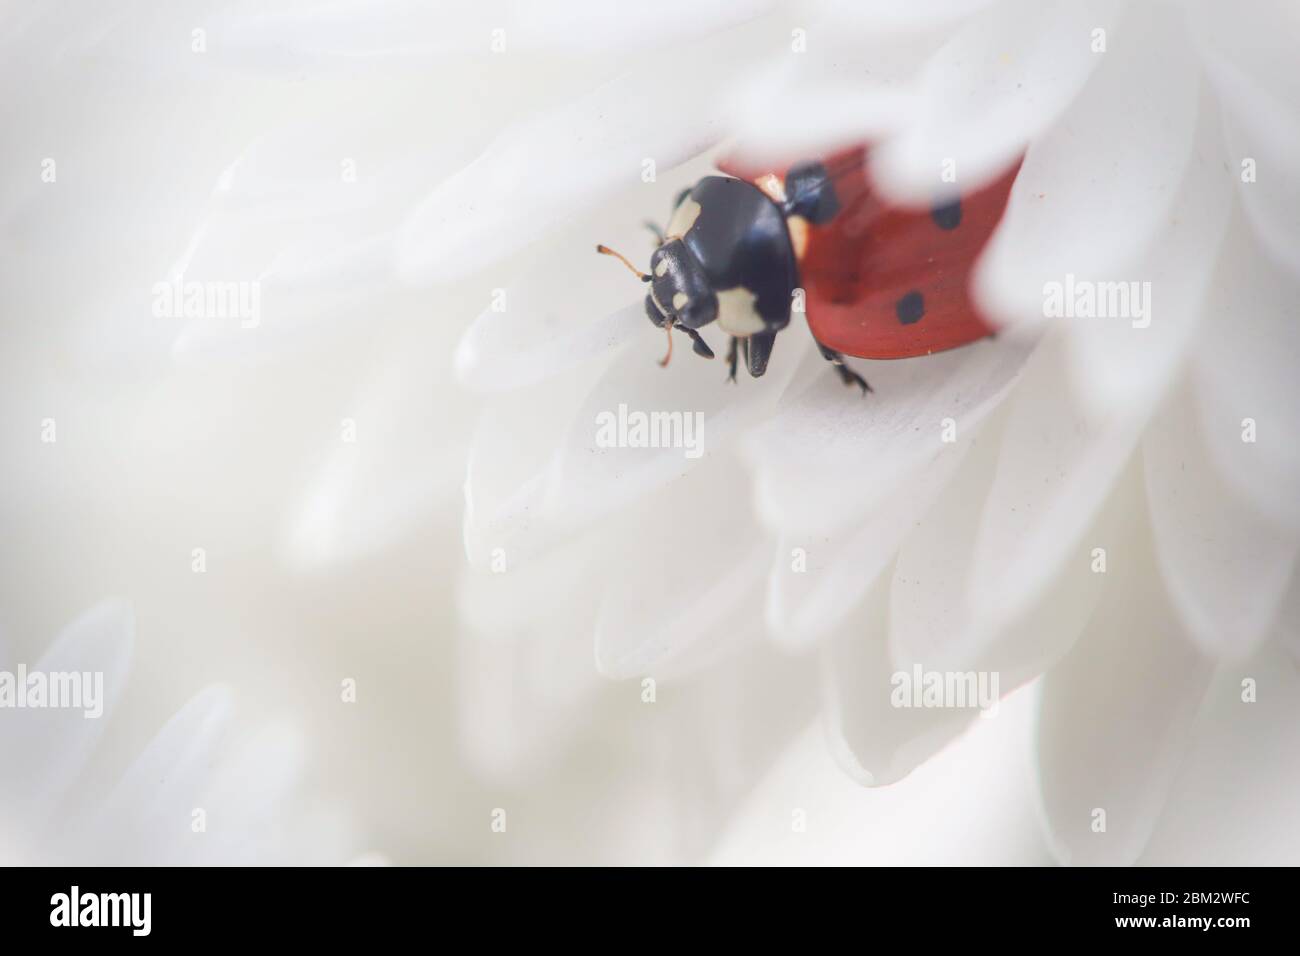 Blurred abstract floral background. Ladybug on chamomile petals close-up. Image about summer, spring, flowers and joy. Stock Photo